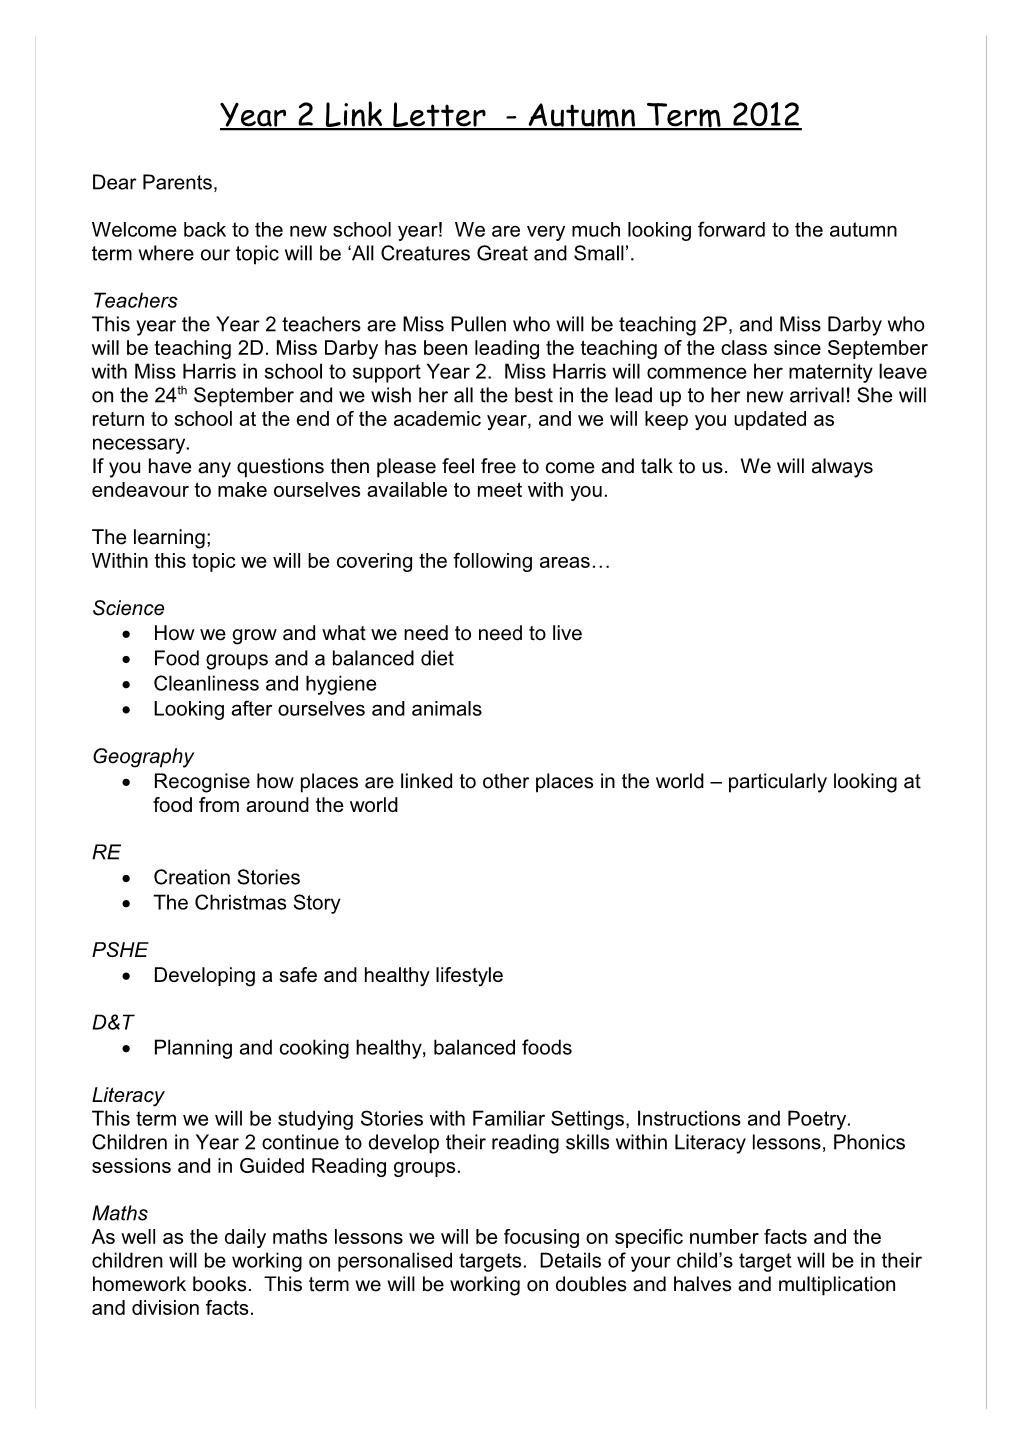 Year 2 Link Letter - Autumn Term 2011